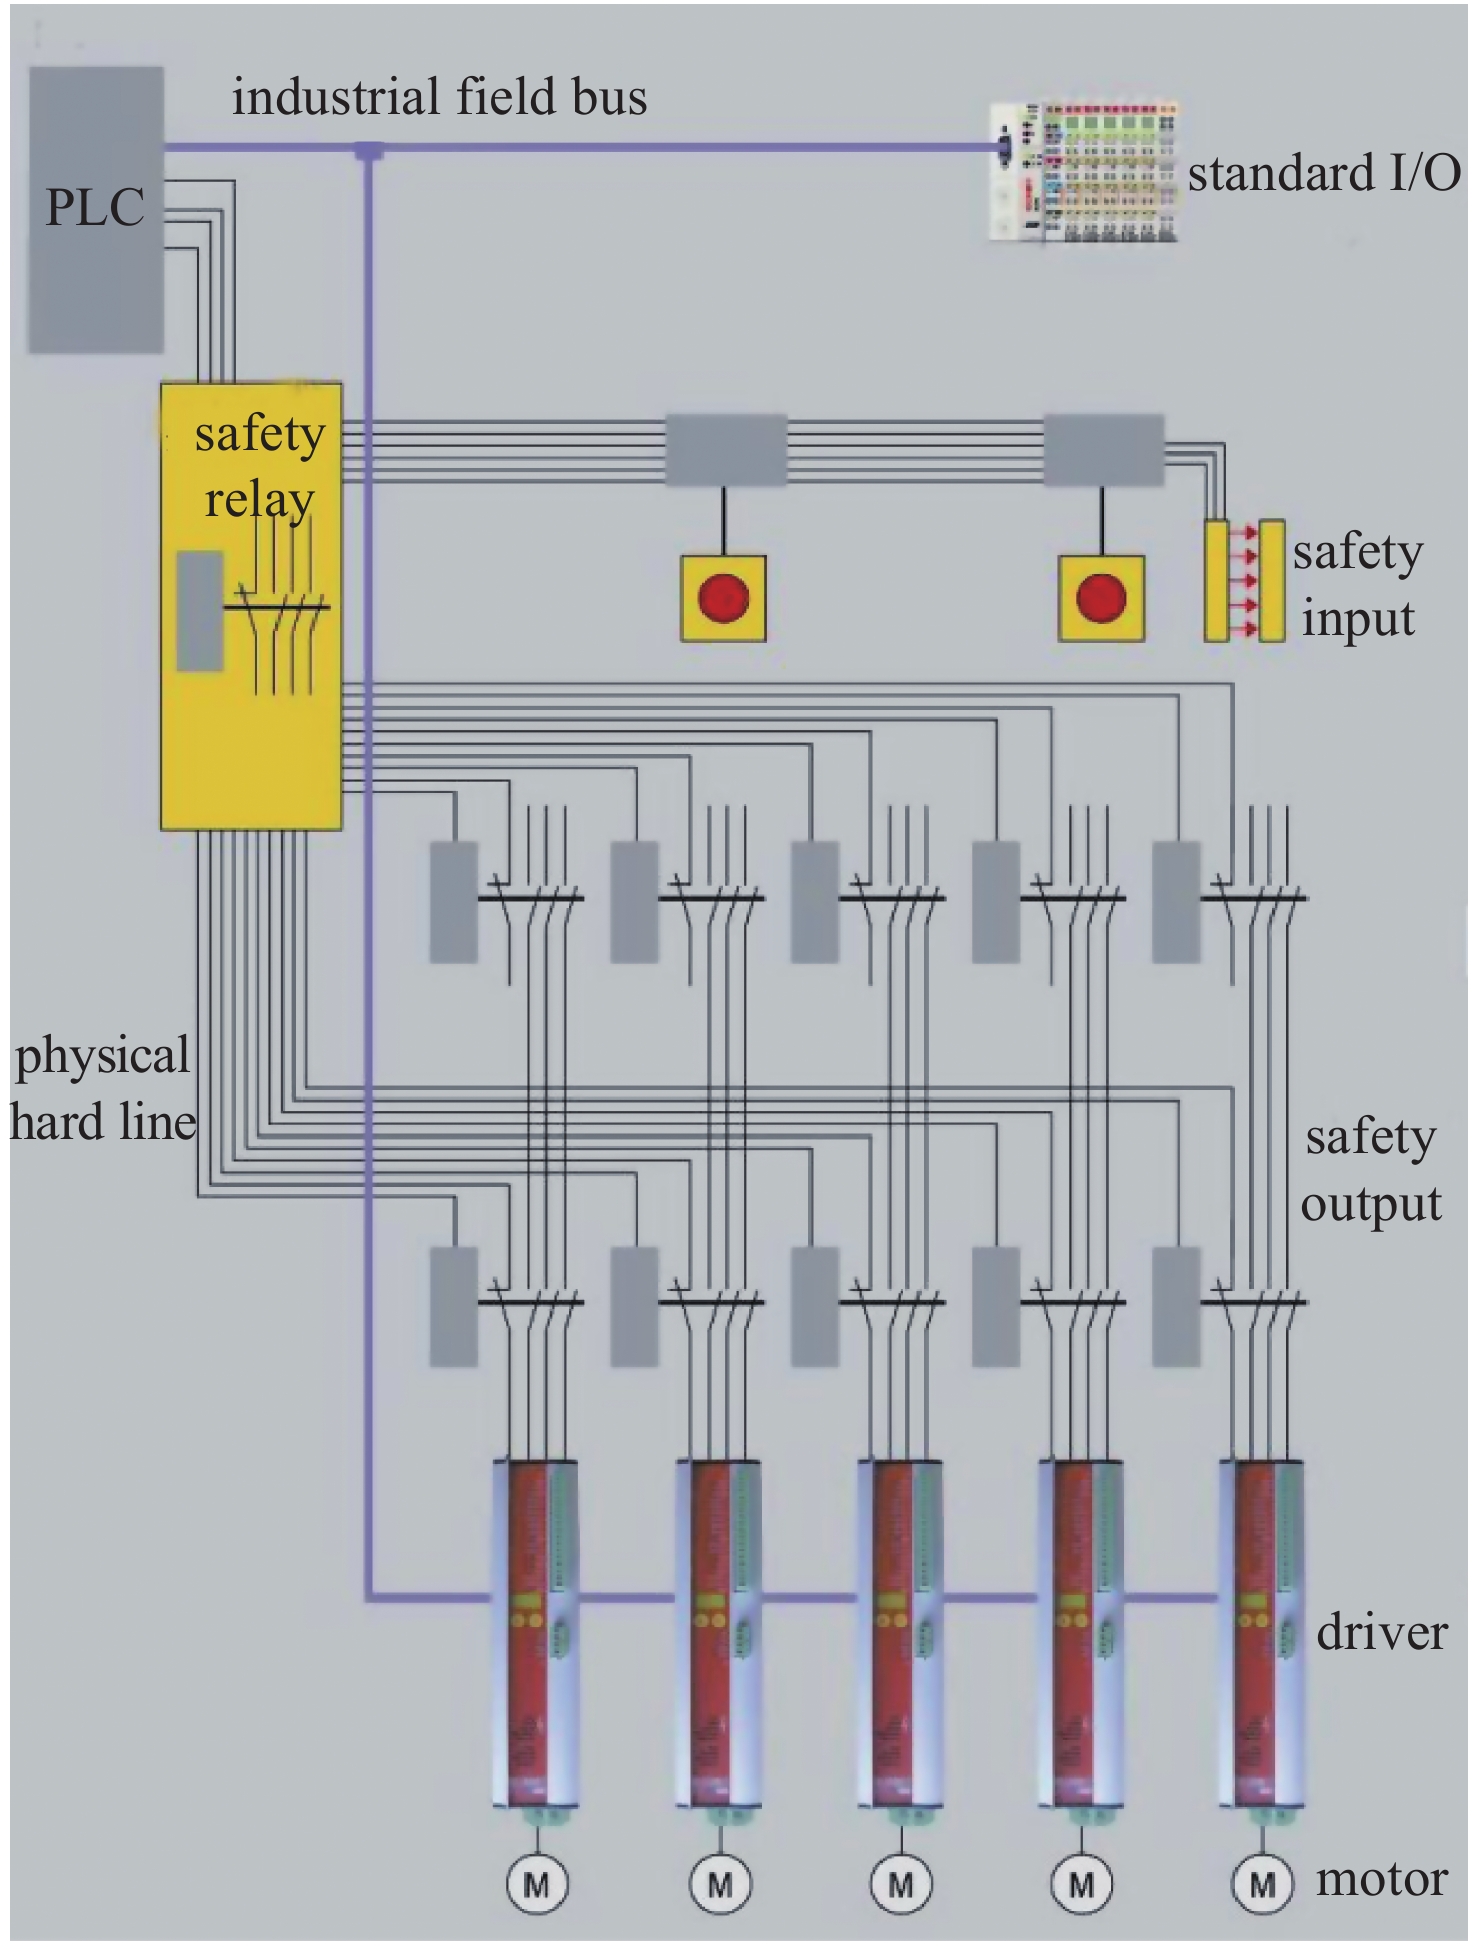 Hardware architecture of safety relay